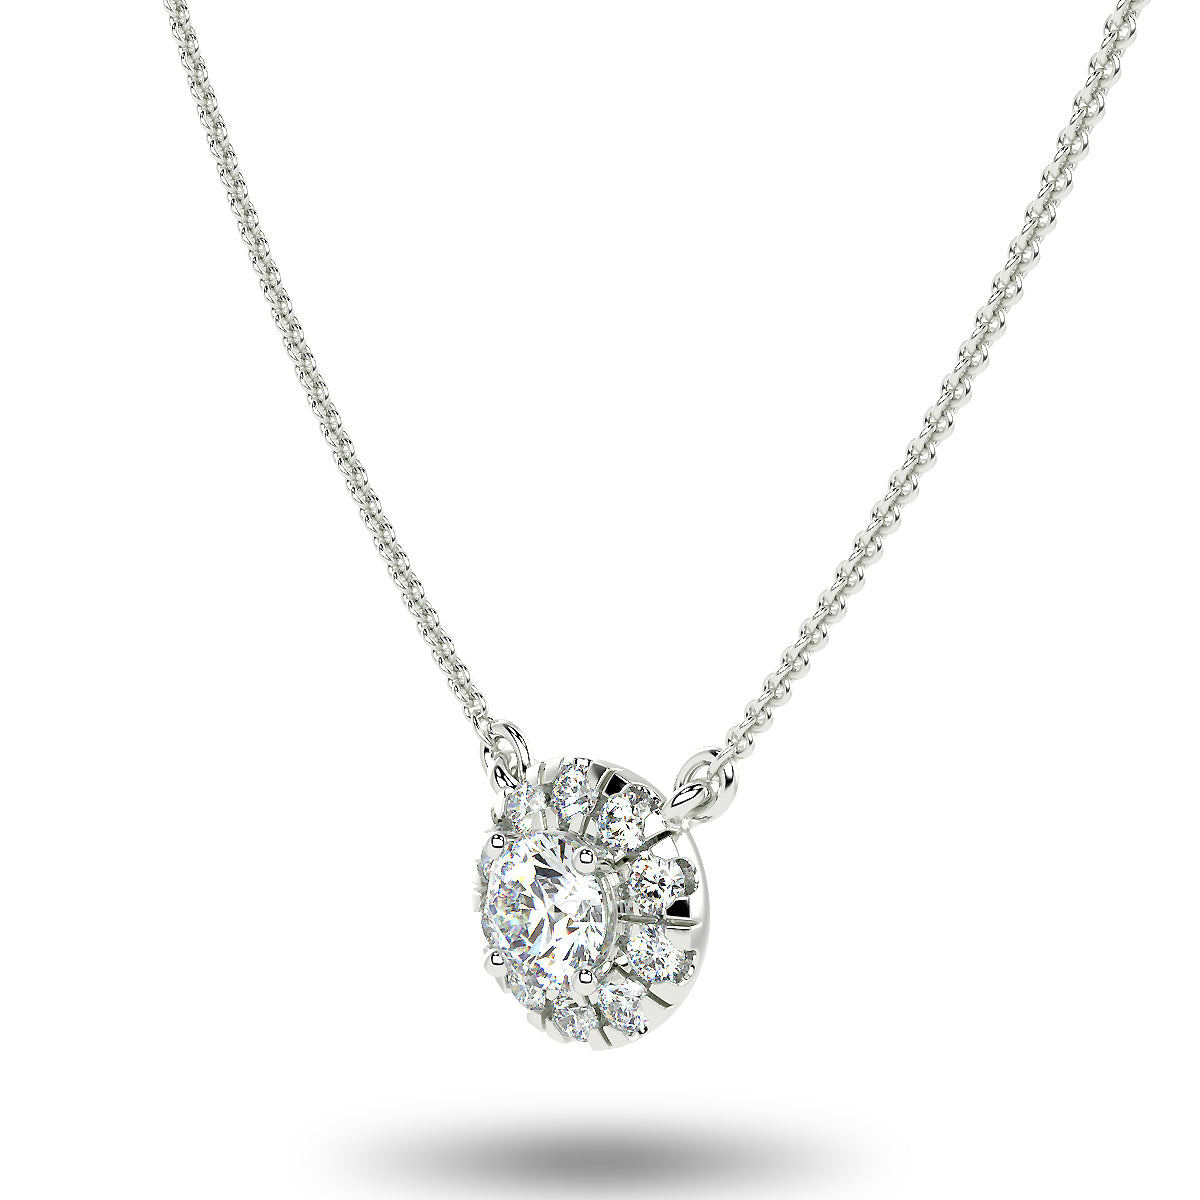 Mira Necklace - White Gold (0.53 Ct. Tw.)